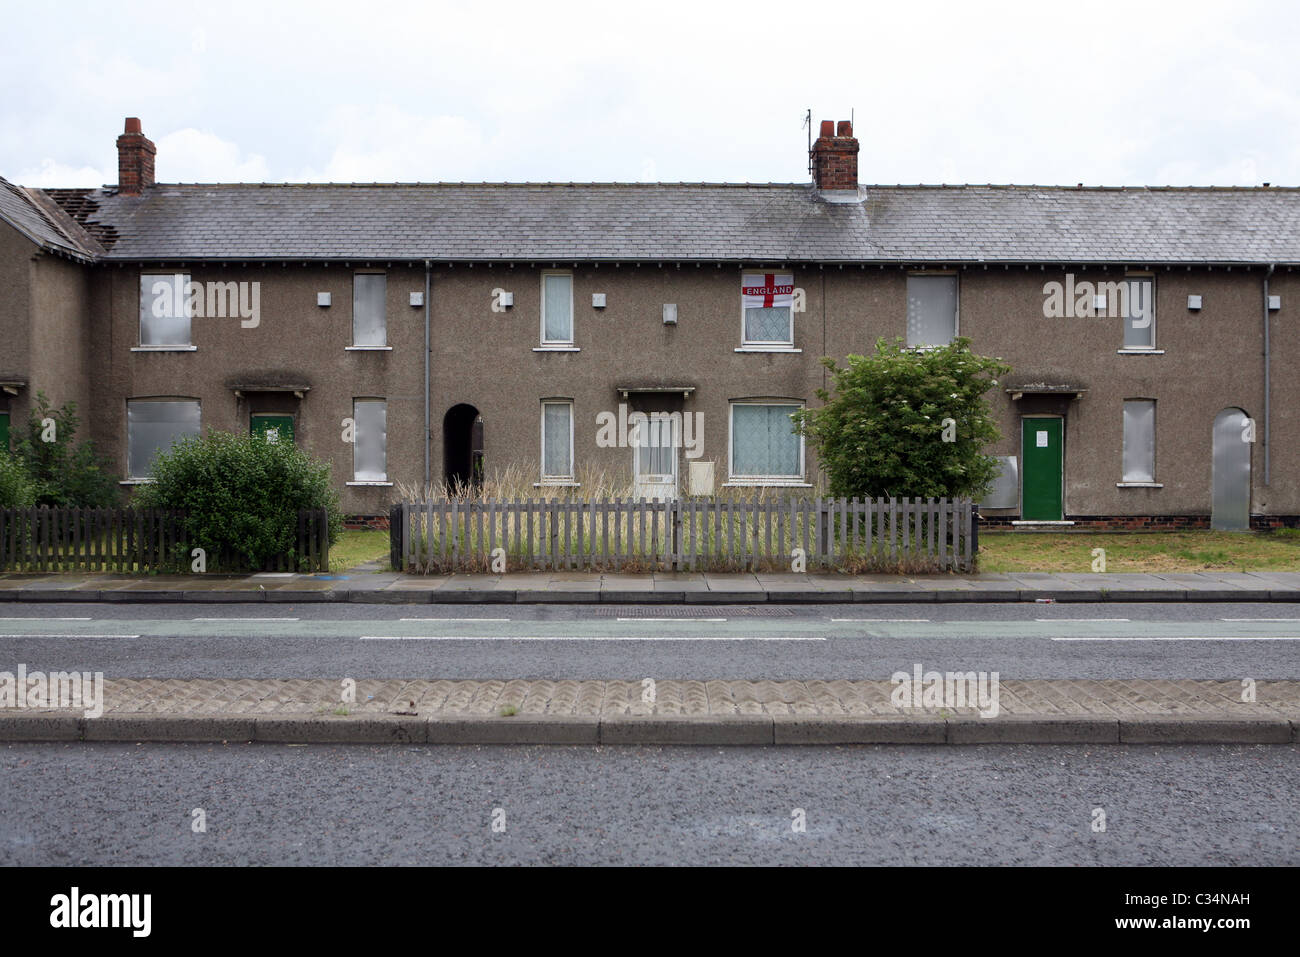 An occupied house displaying the flag of St. George amongst boarded up derelict houses, Grangetown, Middlesbrough, England, UK. Stock Photo